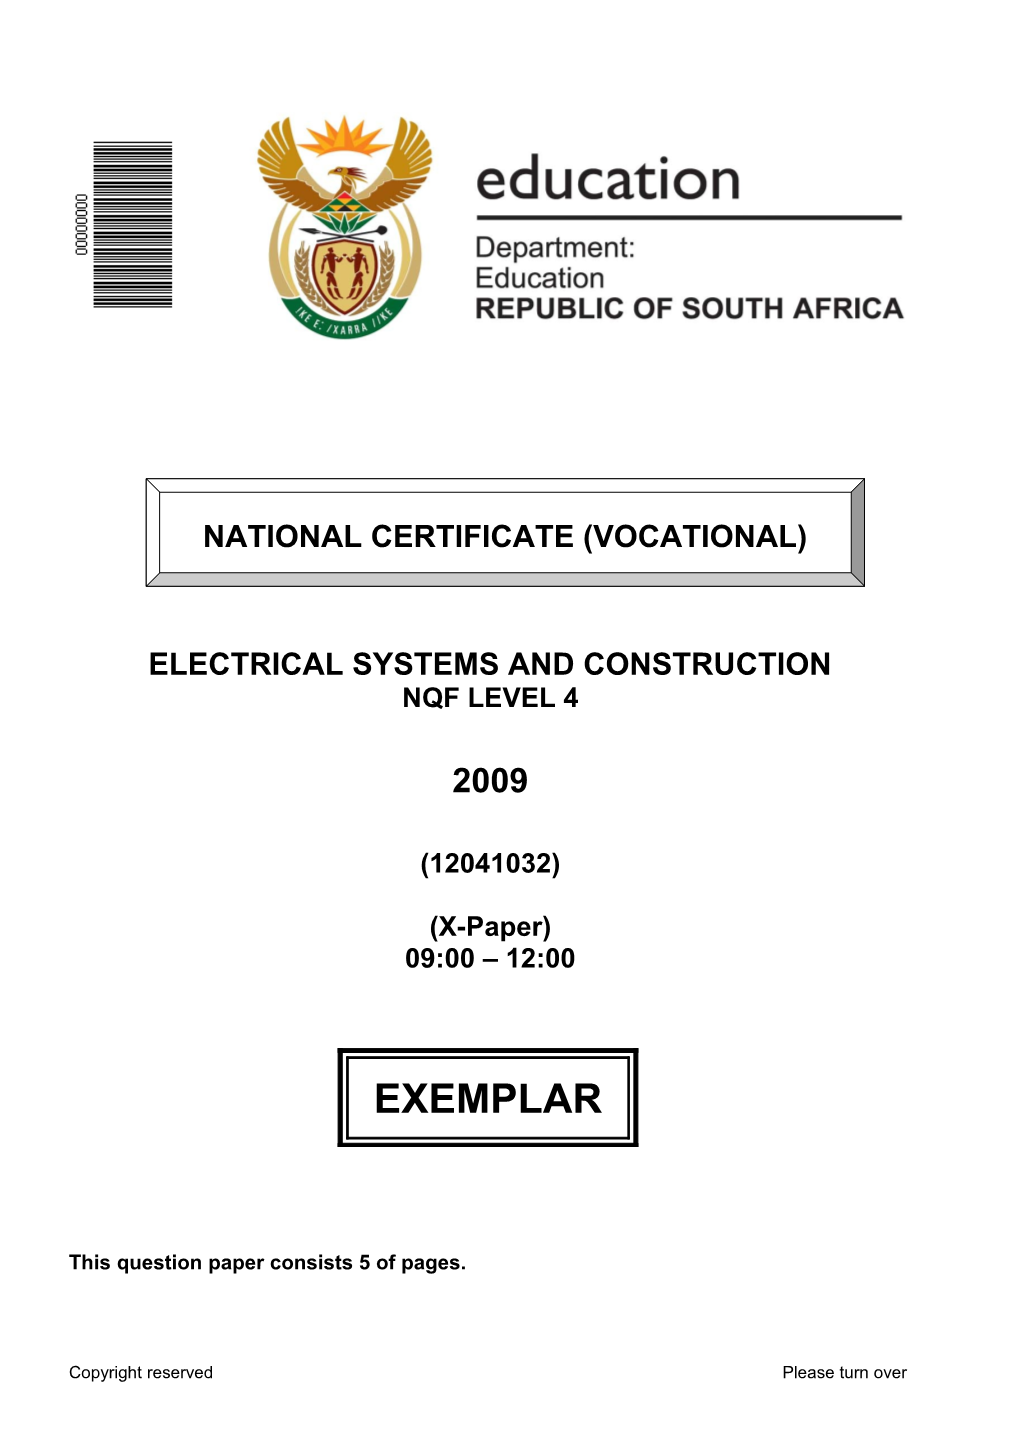 Electrical Systems and Construction Level 4